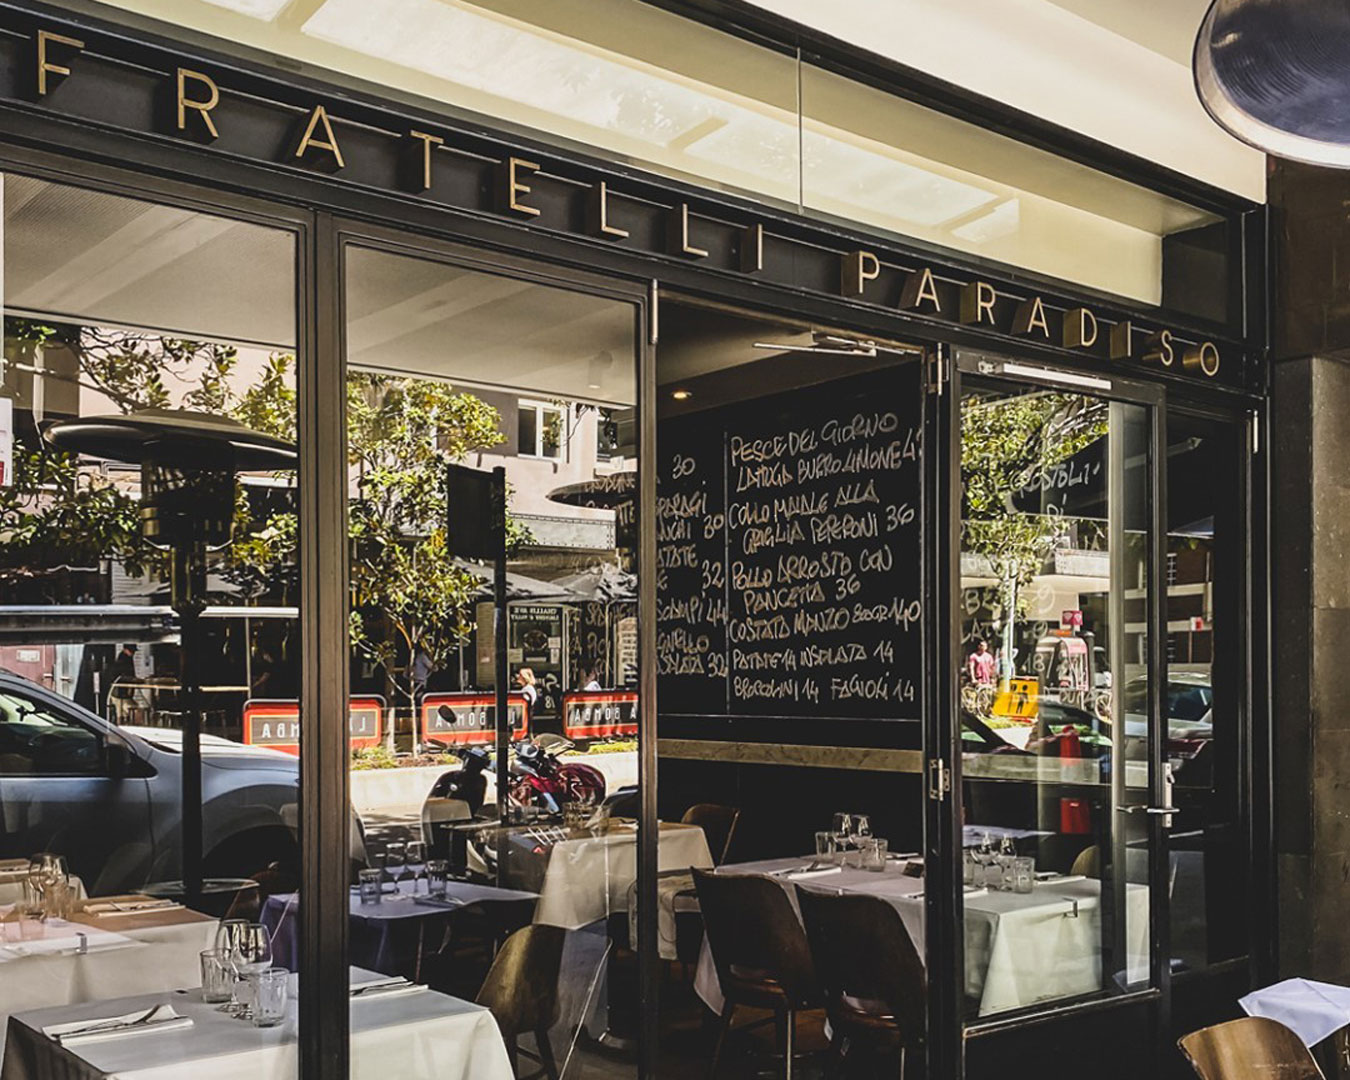 exterior of restaurant with 'Fratelli Paradiso' sign